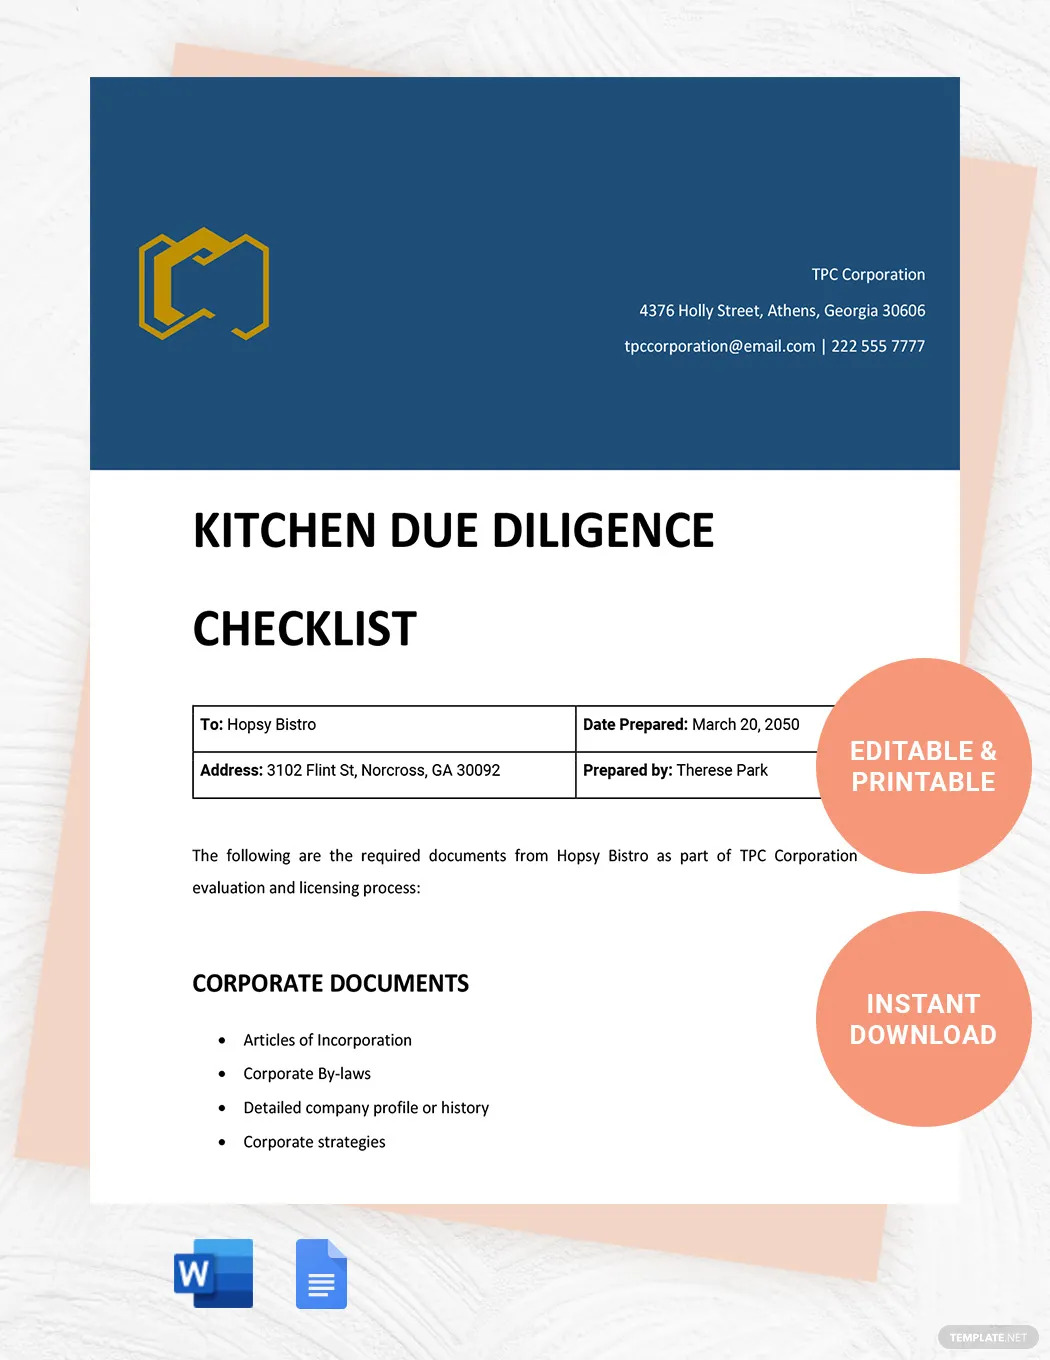 kitchen due diligence ideas and examples